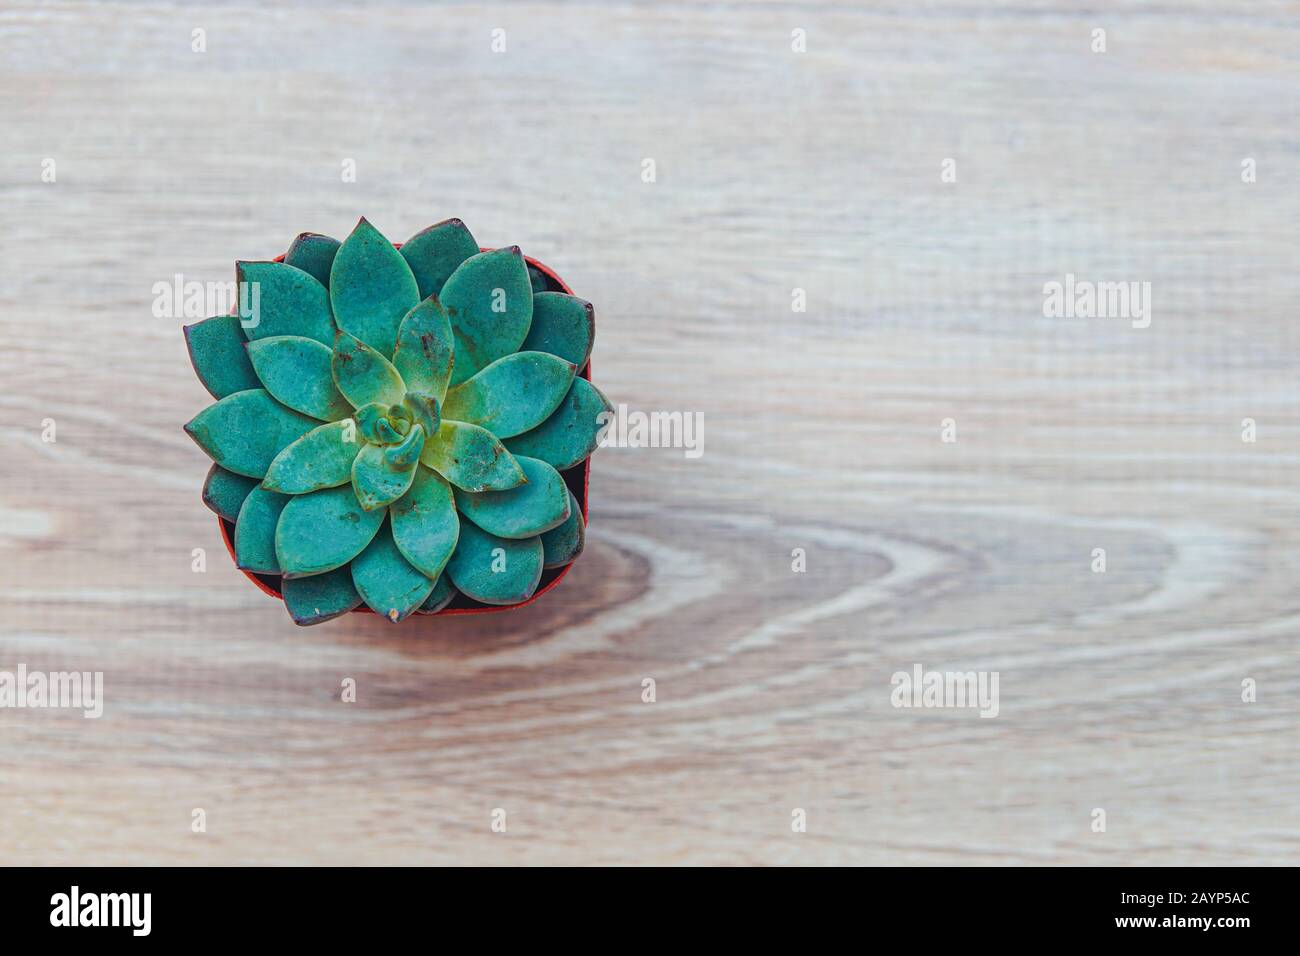 Home plant Echeveria on wooden background, with empty copy space Stock Photo